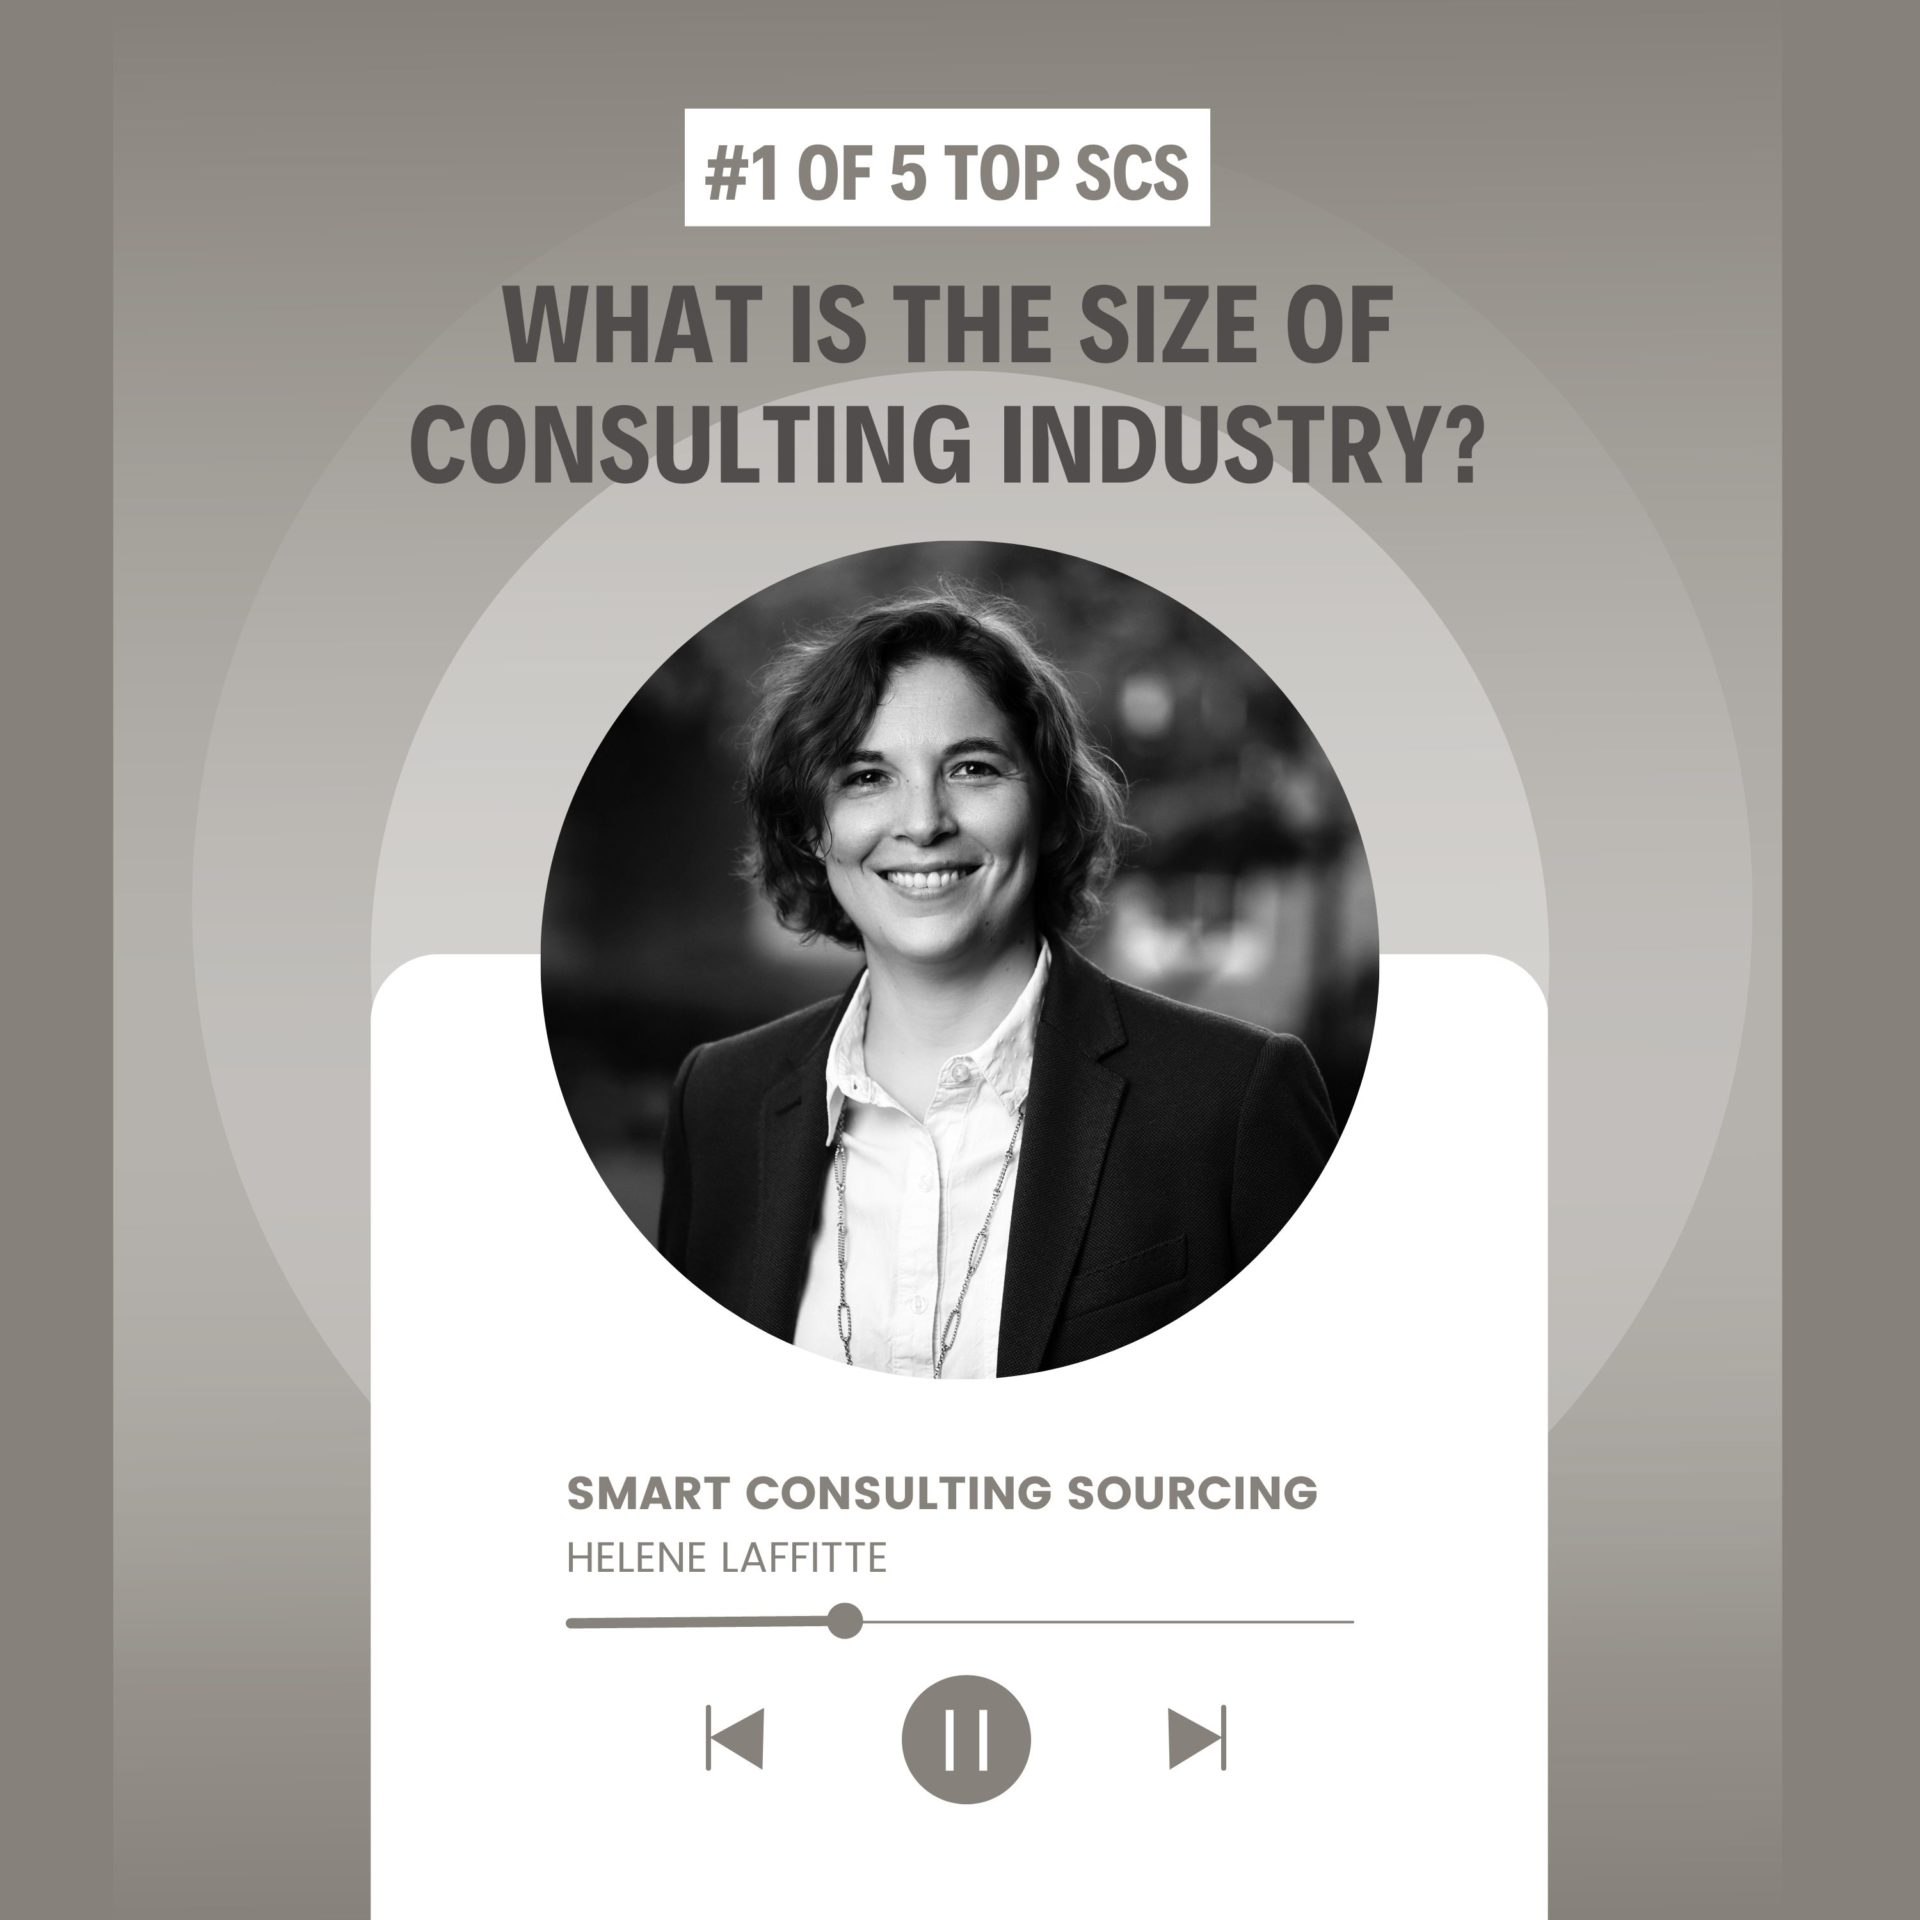 Smart Consulting Sourcing